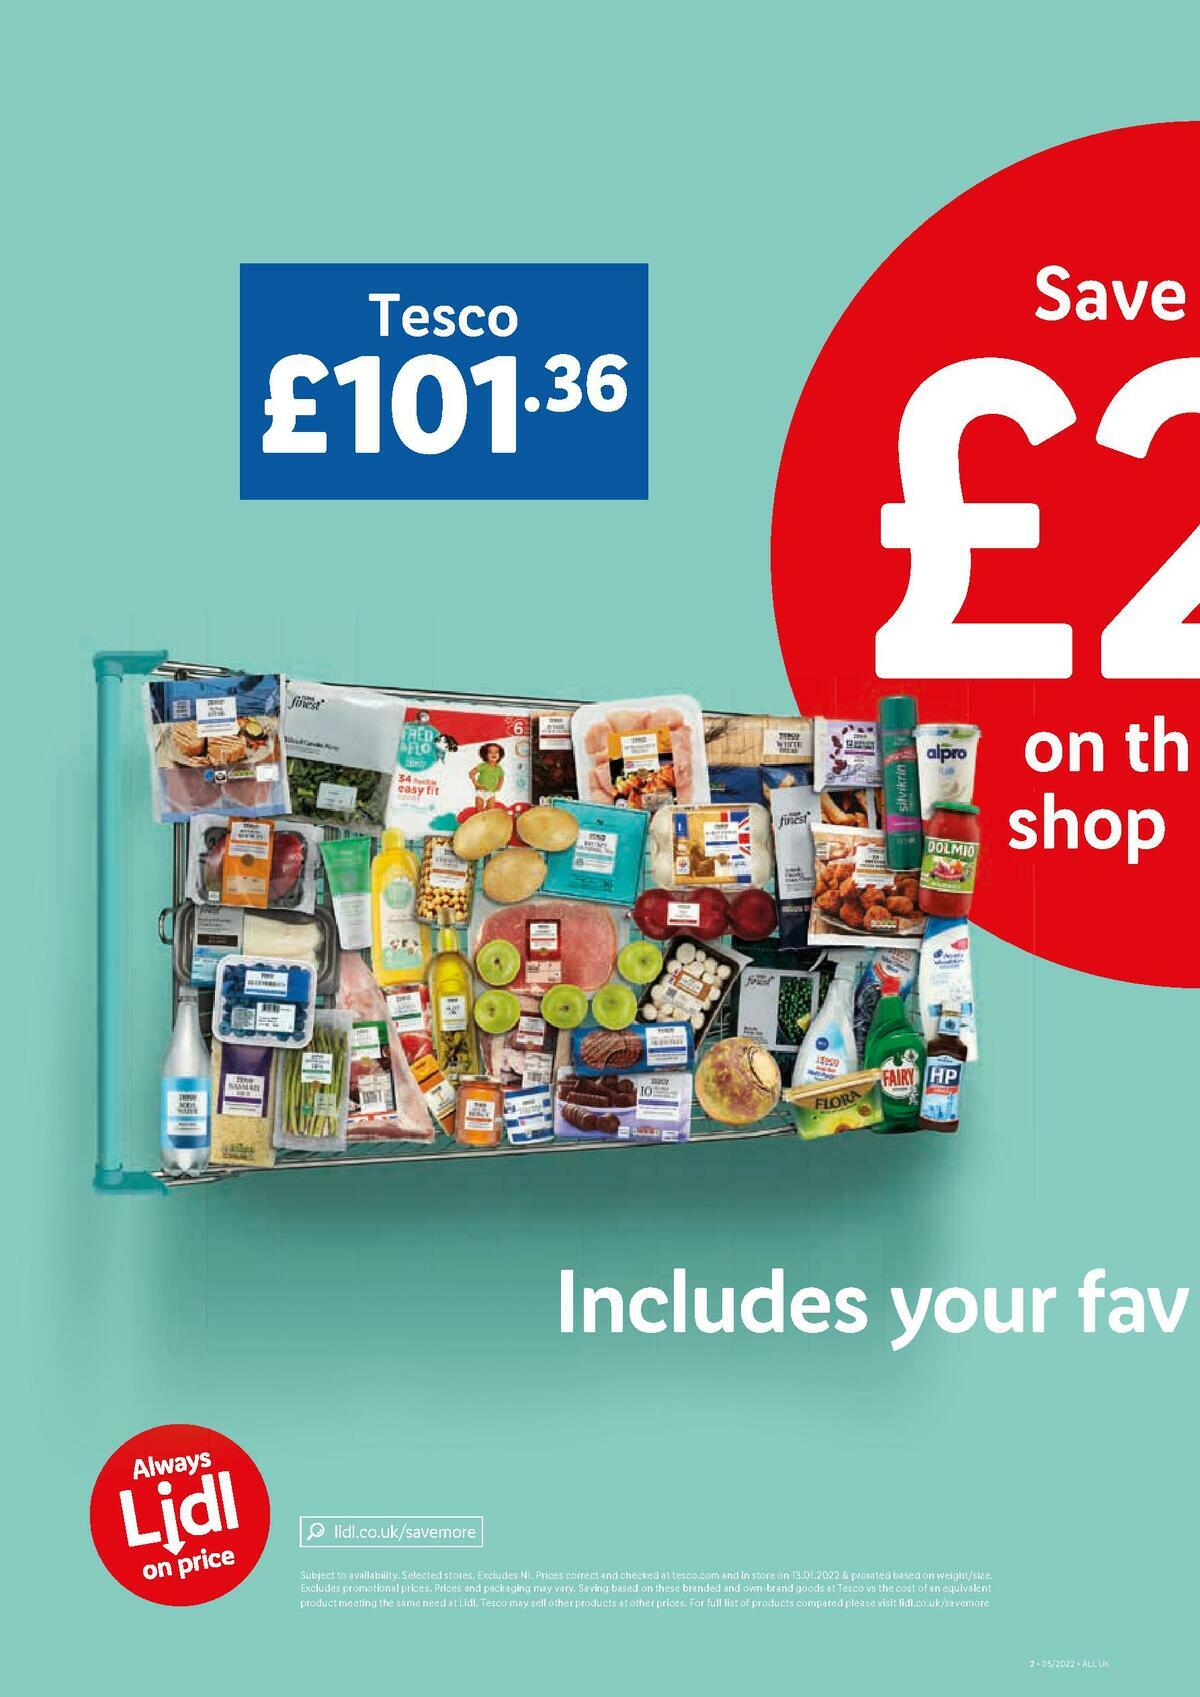 LIDL Offers from 3 February